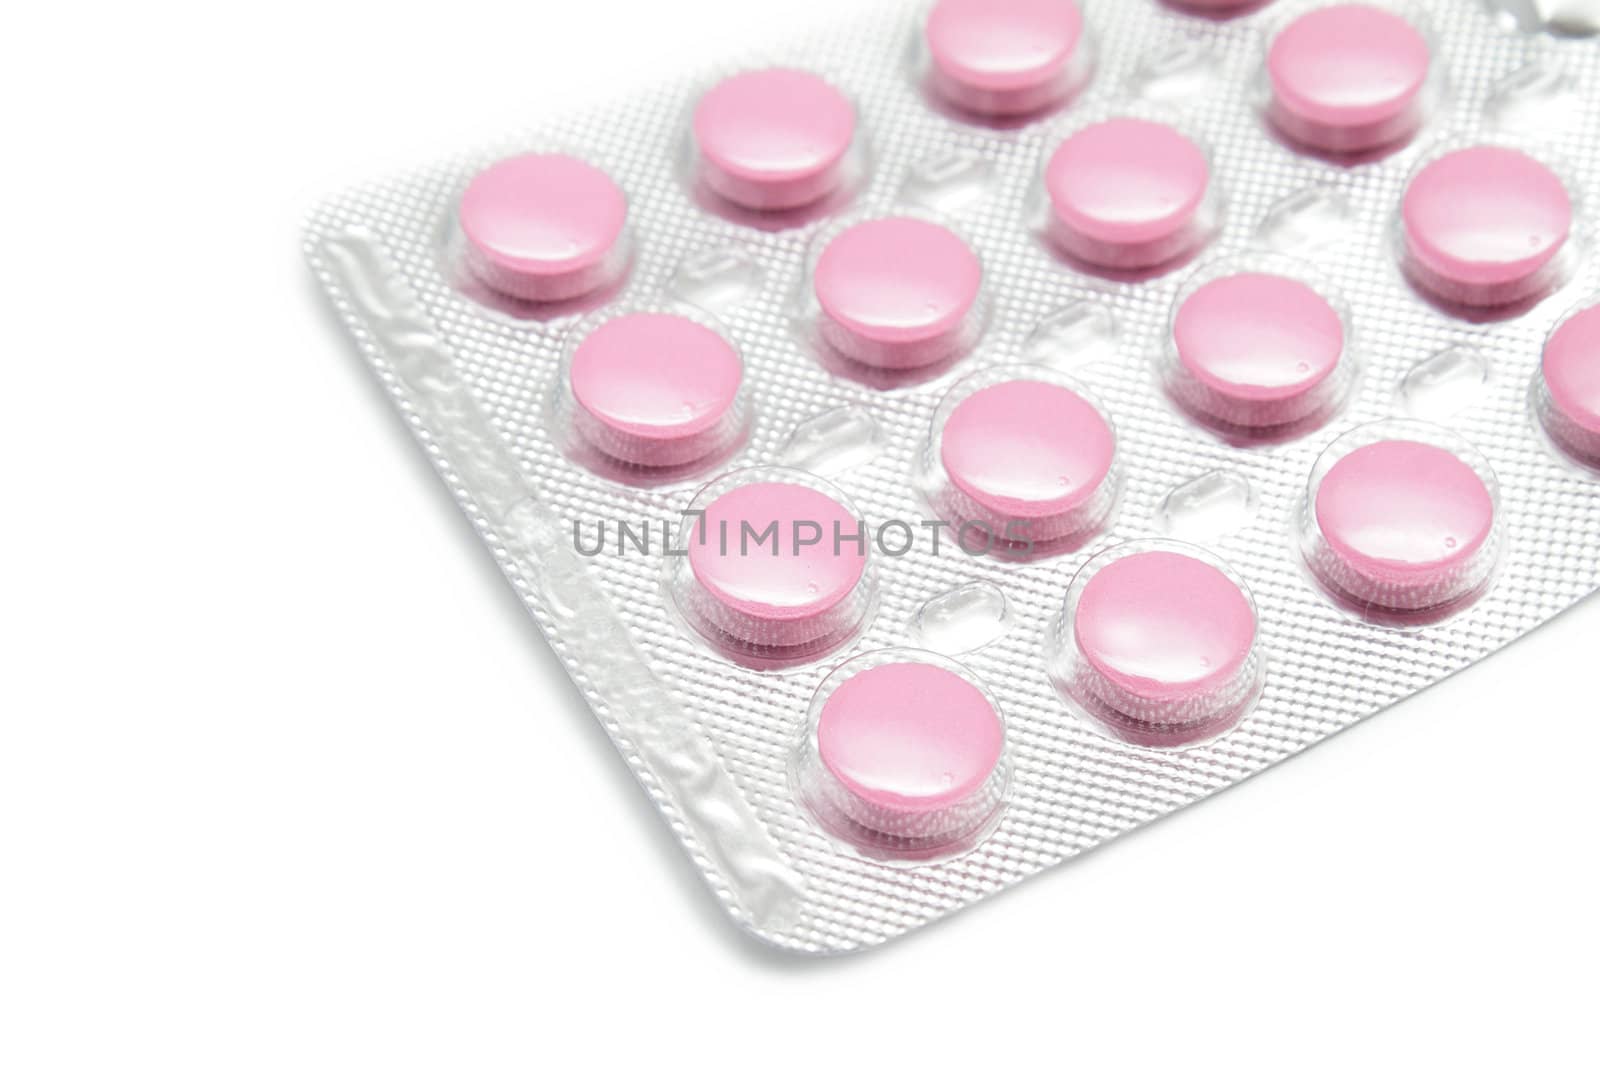 Pink pills in the silver pack on white background